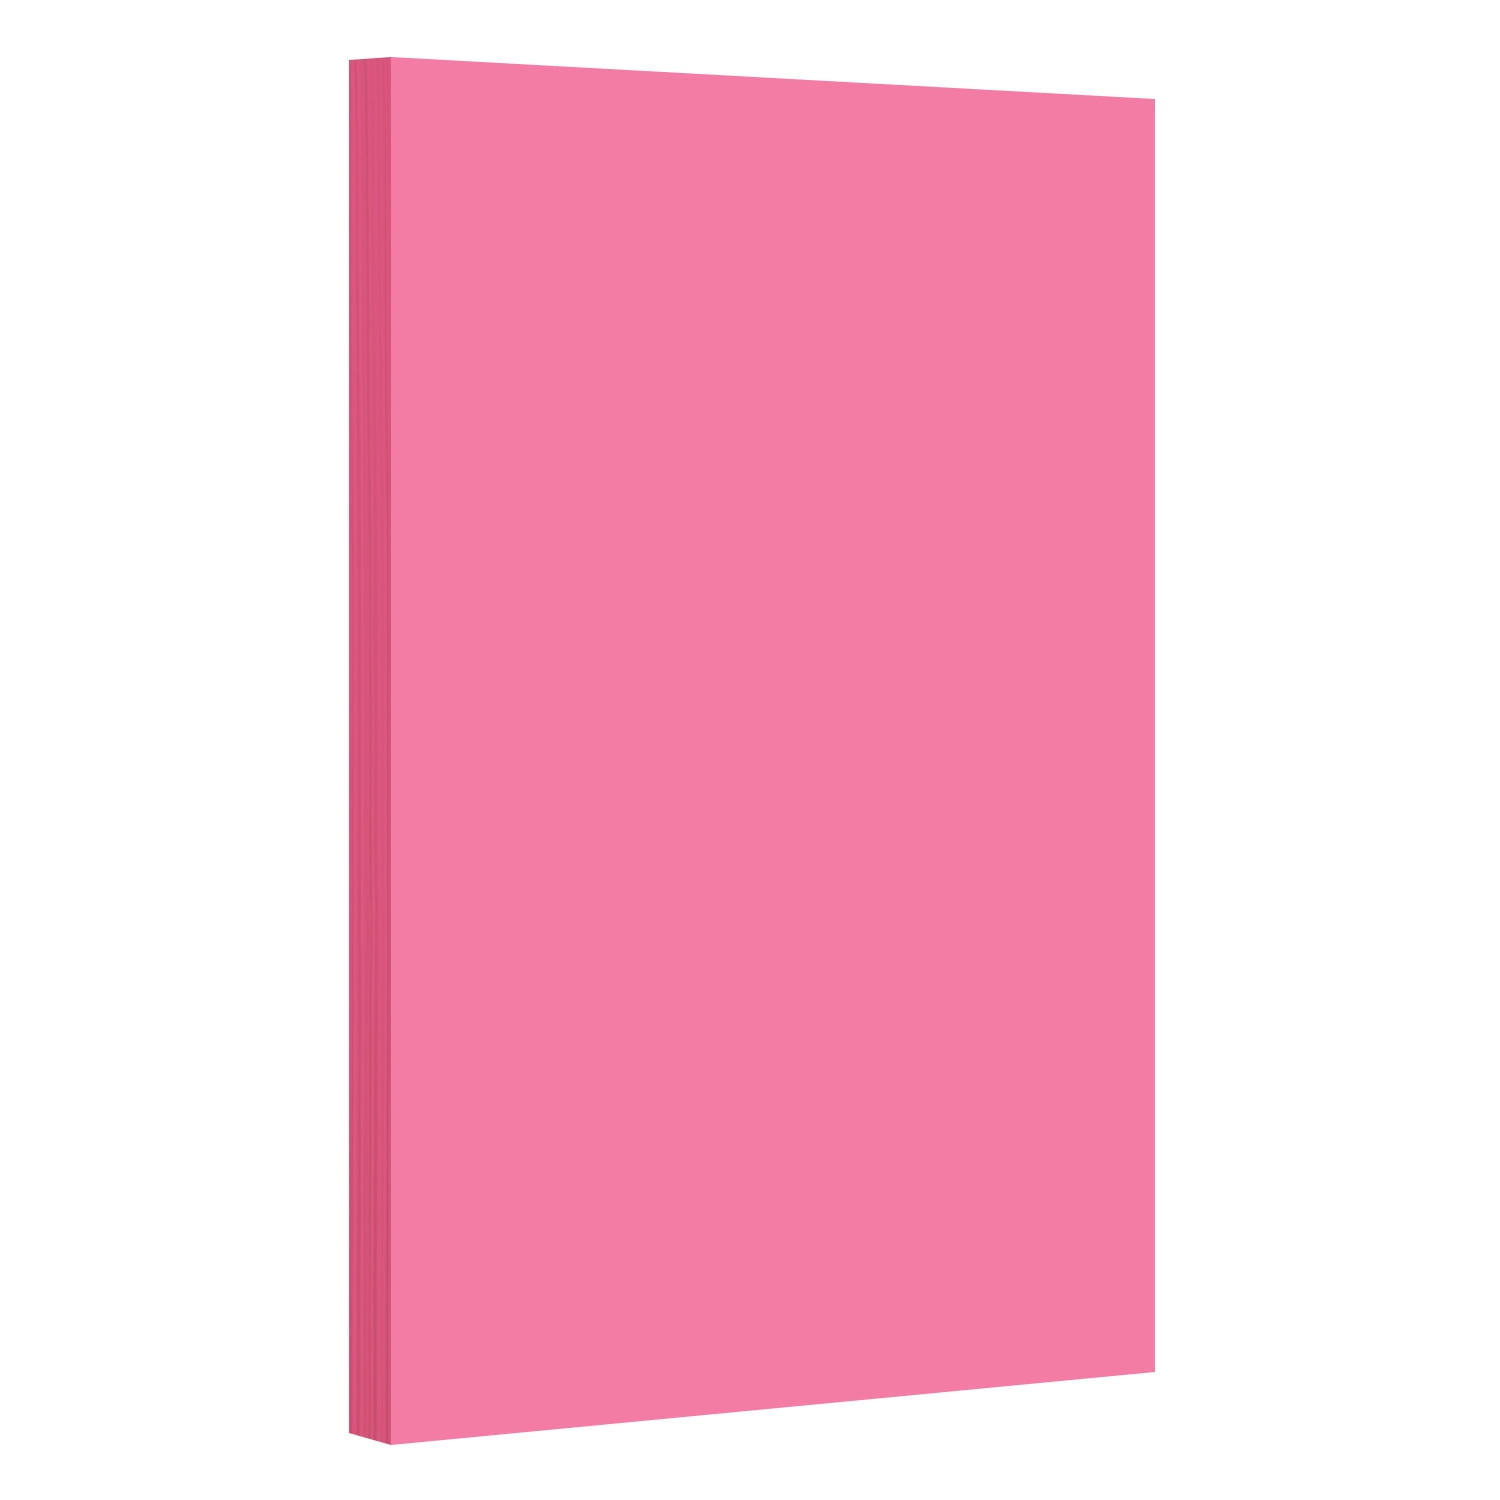 JAM Paper Bright Color Paper, 8.5 x 11, 24 Lb. Brite Hue Ultra Fuchsia  Pink 3 Hole Punch, 100/Pack at